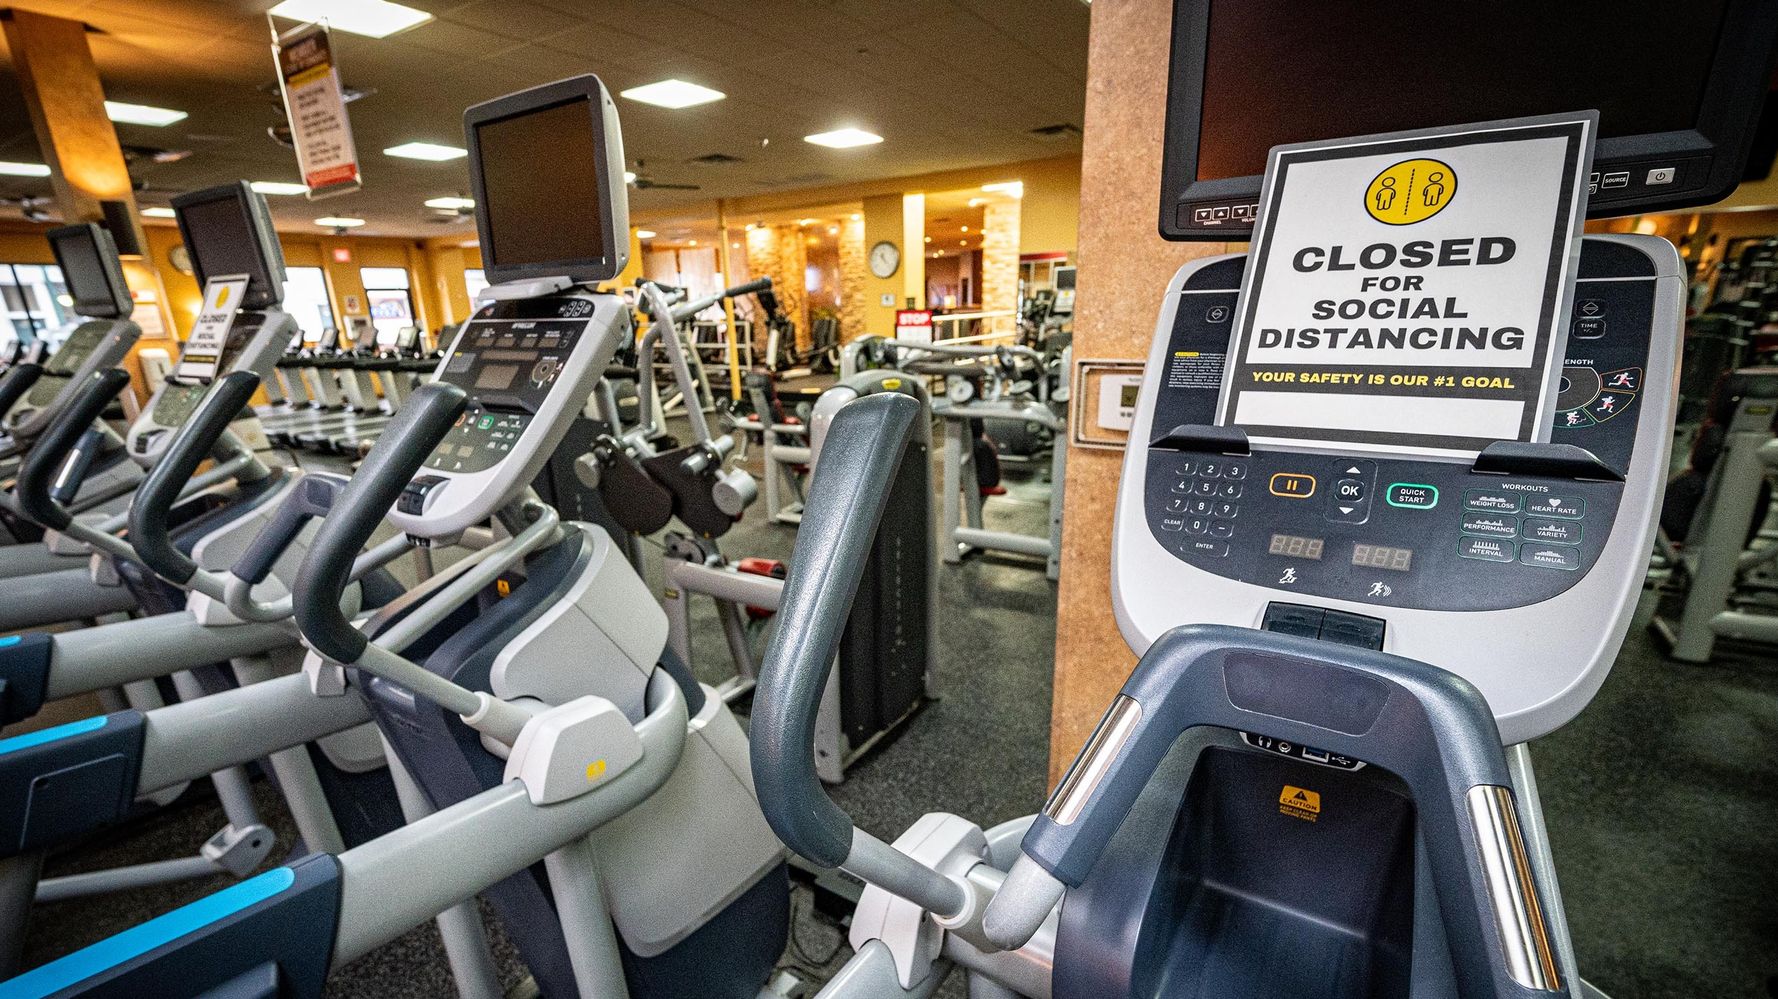 The CDC calls for stricter precautions at the gym after COVID-19 outbreaks related to facilities